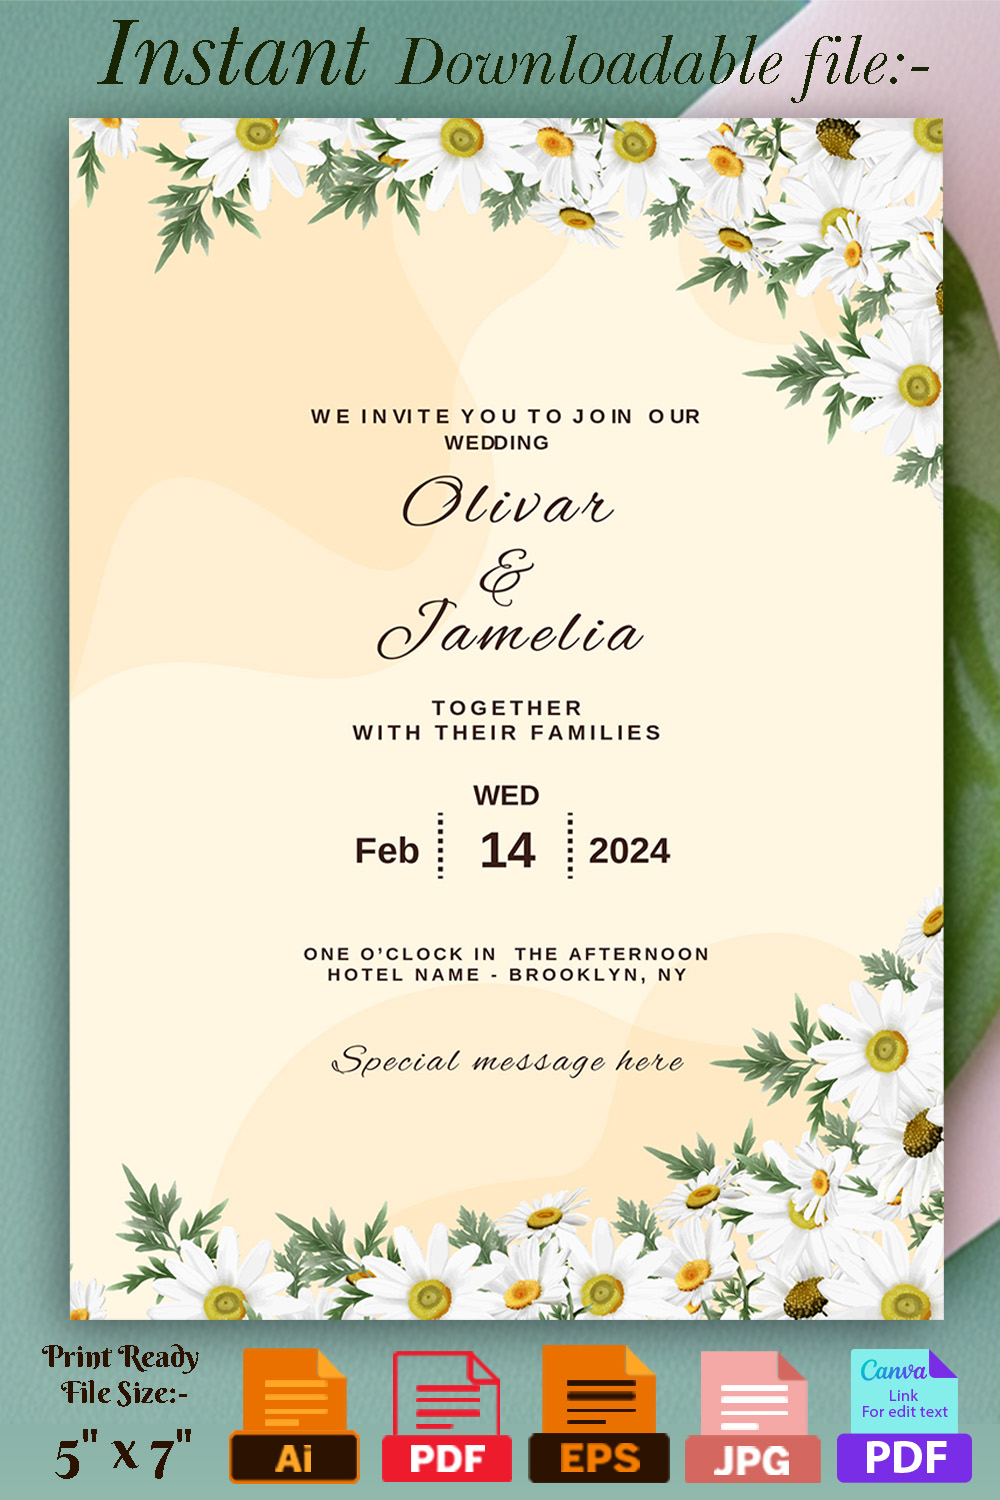 Image with a wonderful wedding invitation card in yellow tones and with flowers.